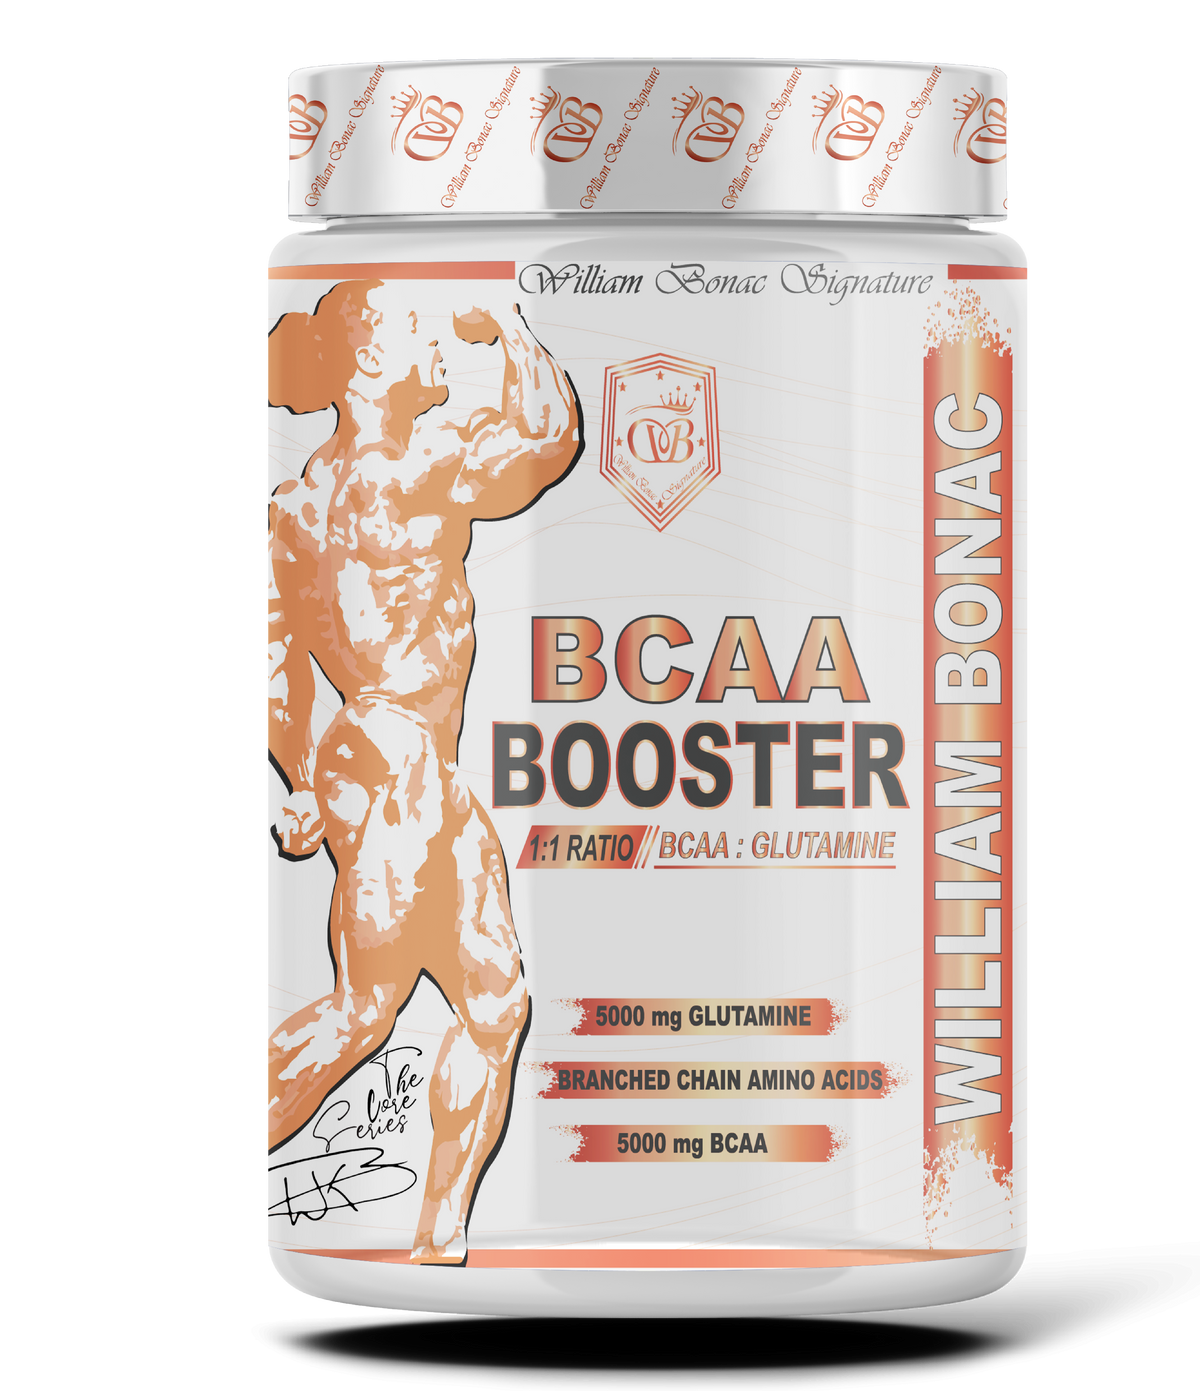 BCAA BOOSTER CORE SERIES